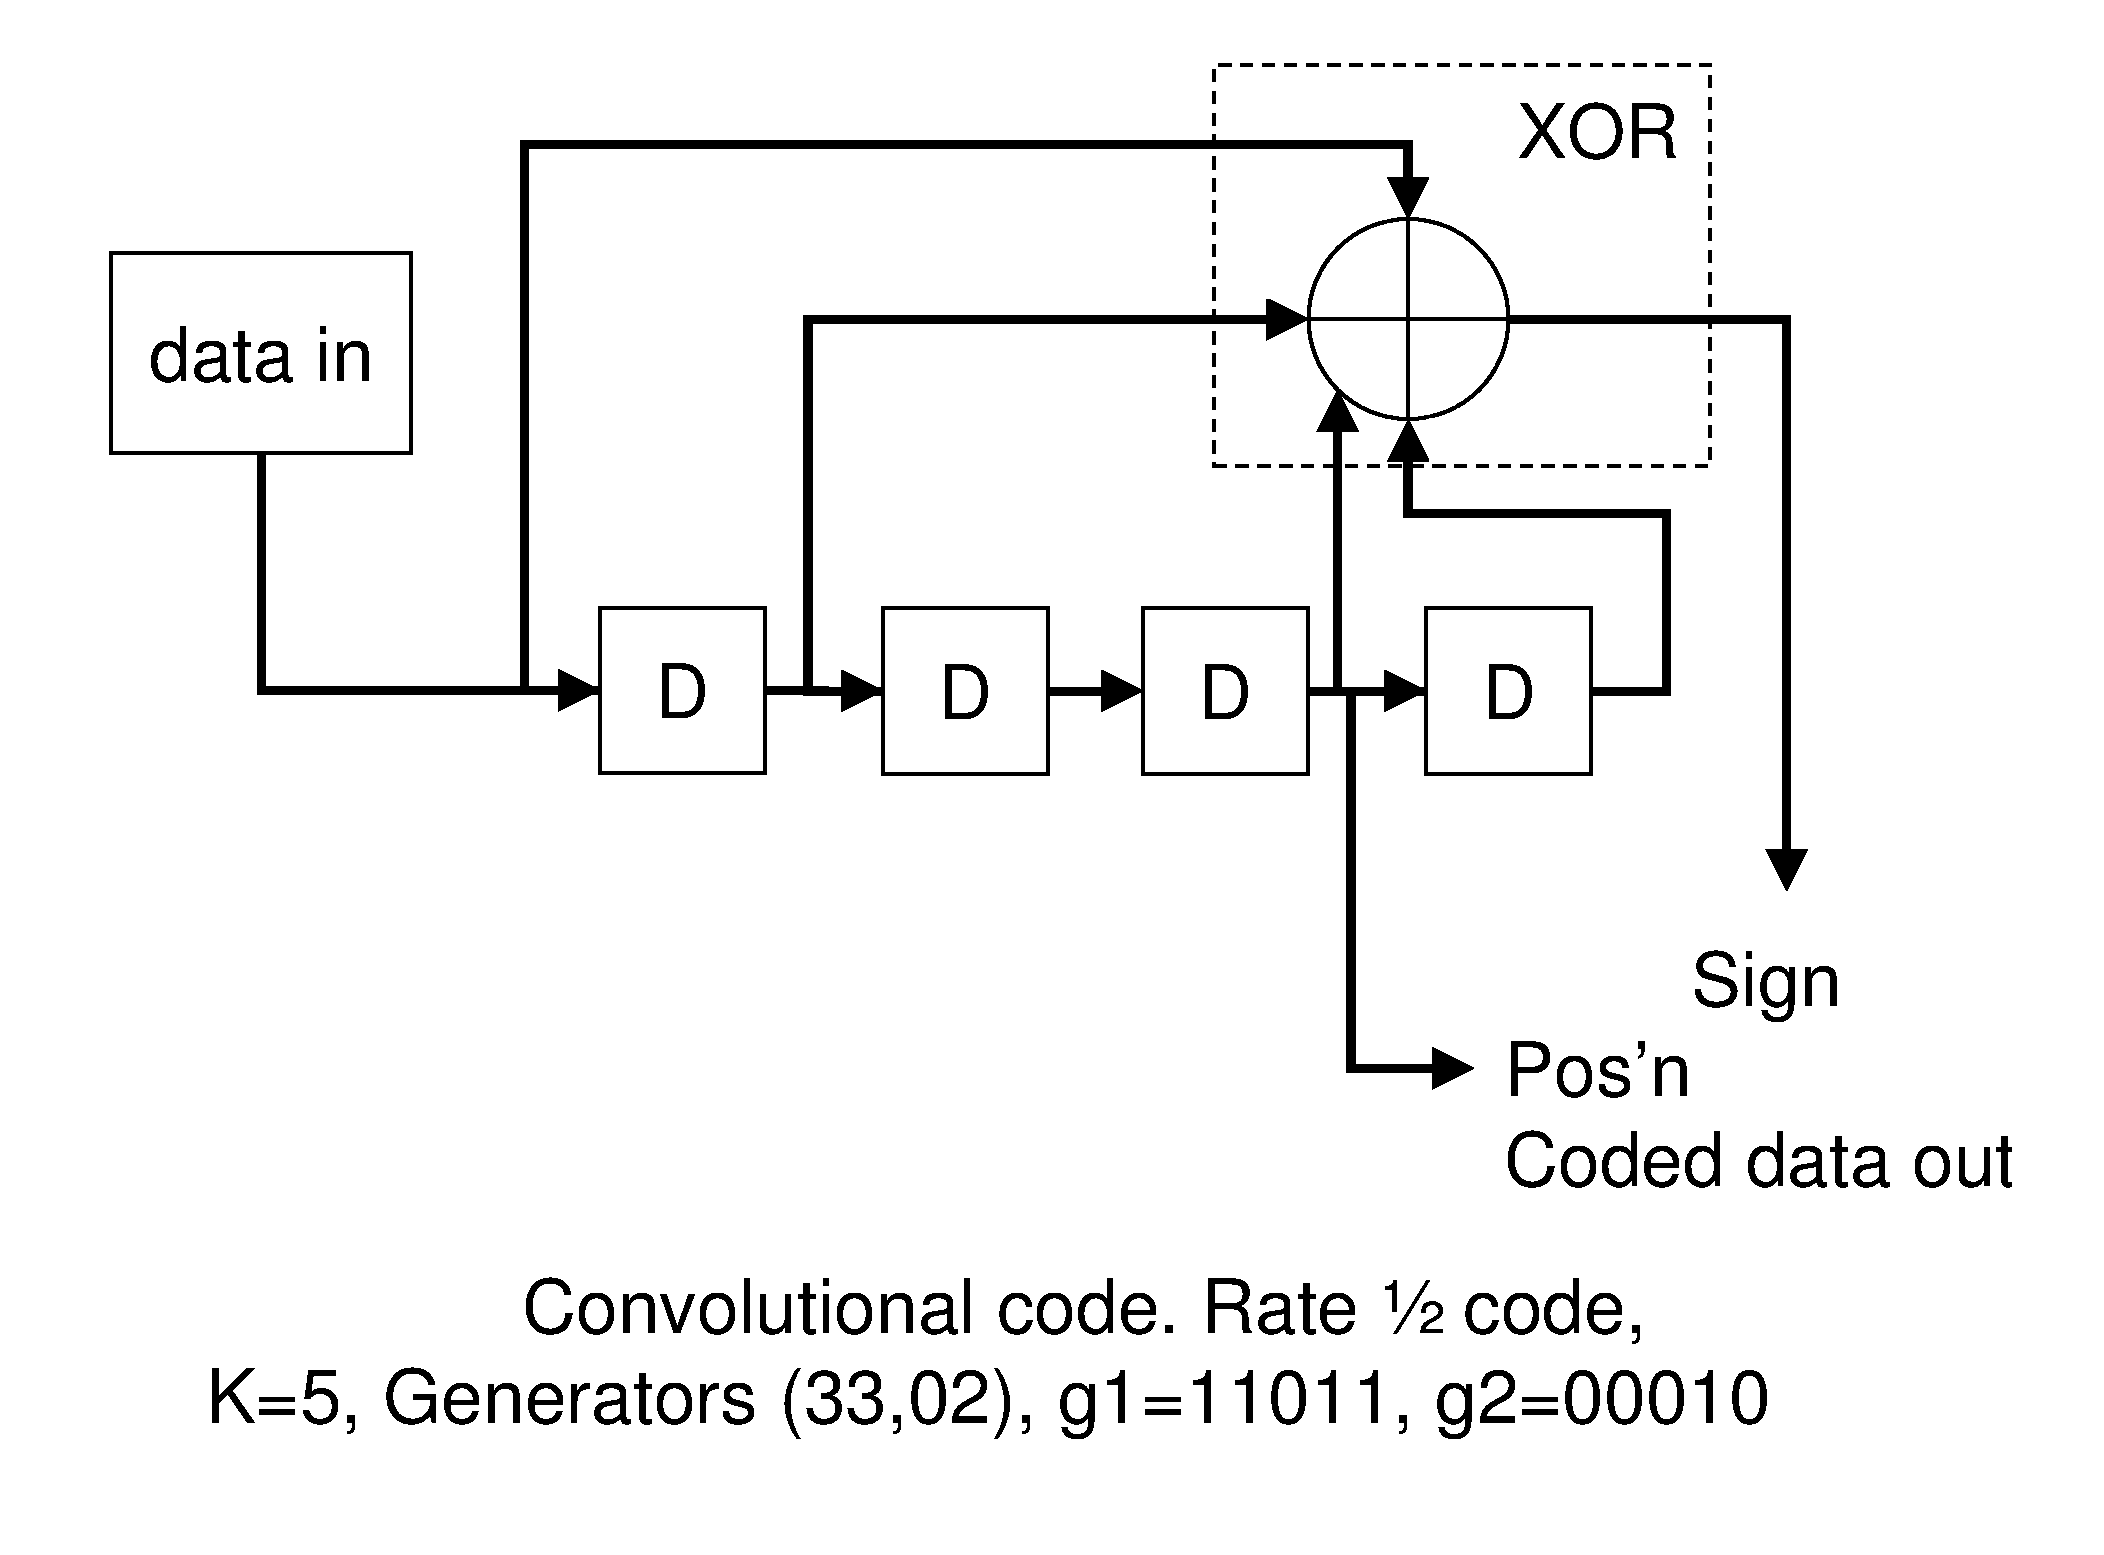 Method and apparatus for transmitting and receiving convolutionally coded data for use with combined binary phase shift keying (BPSK) modulation and pulse position modulation (PPM)